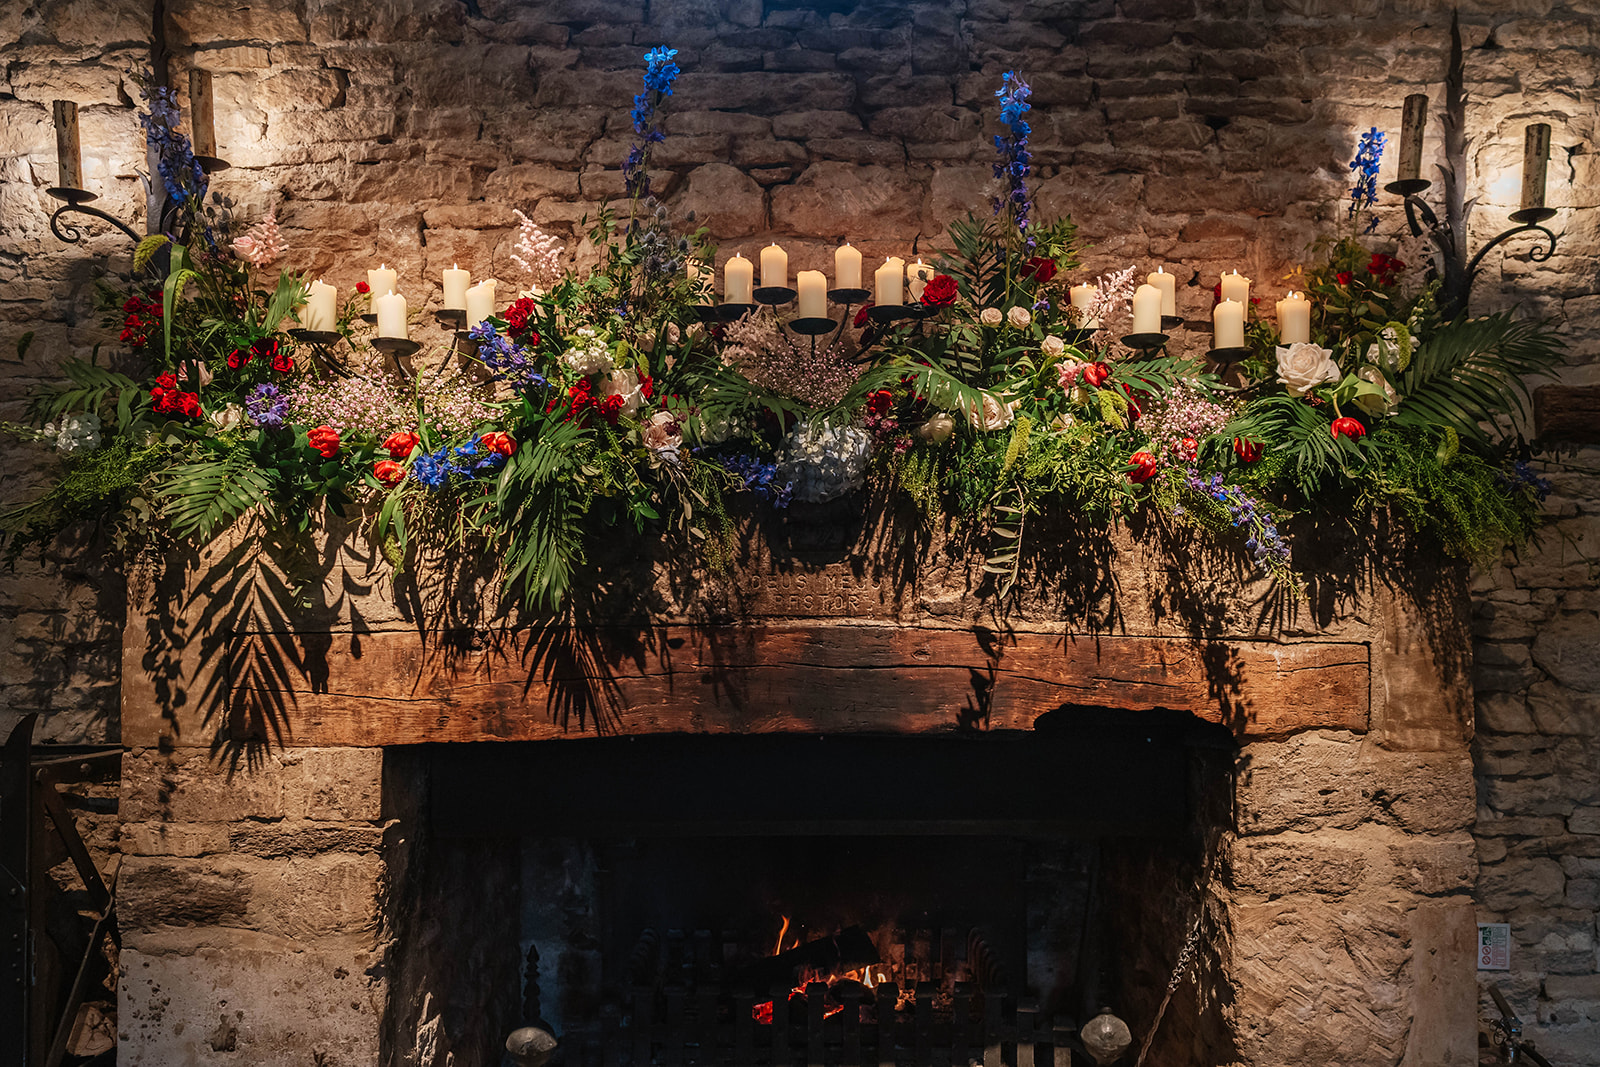 Fireplace at Cripps barn with flowers and candles